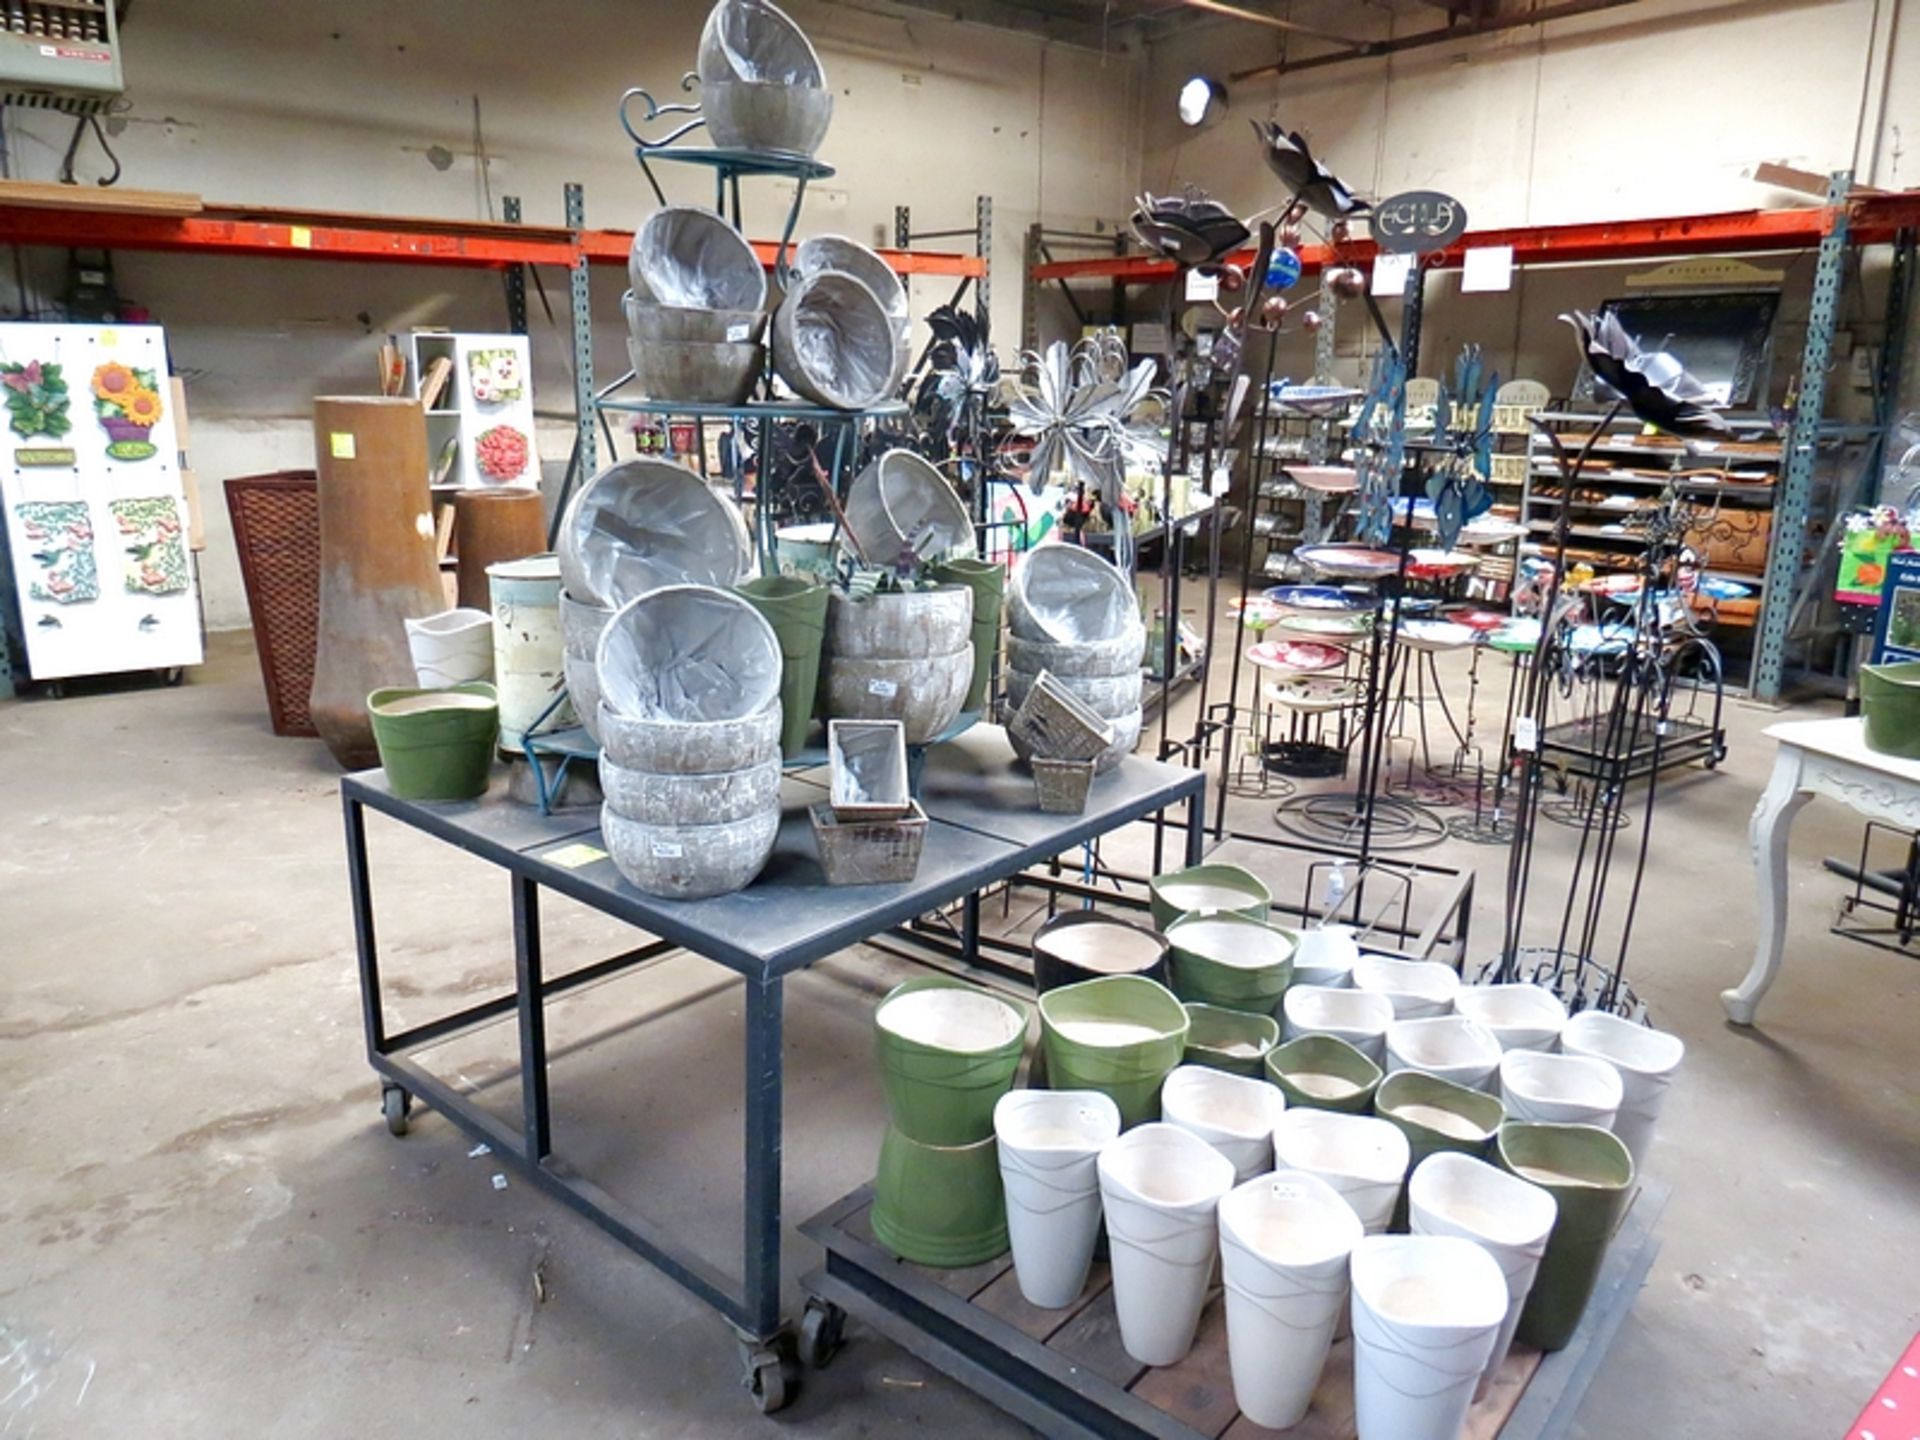 Lot Assorted Cermic, Wood and Metal Planters, Metal 3-Tier Shelf w/Rolling Display Table